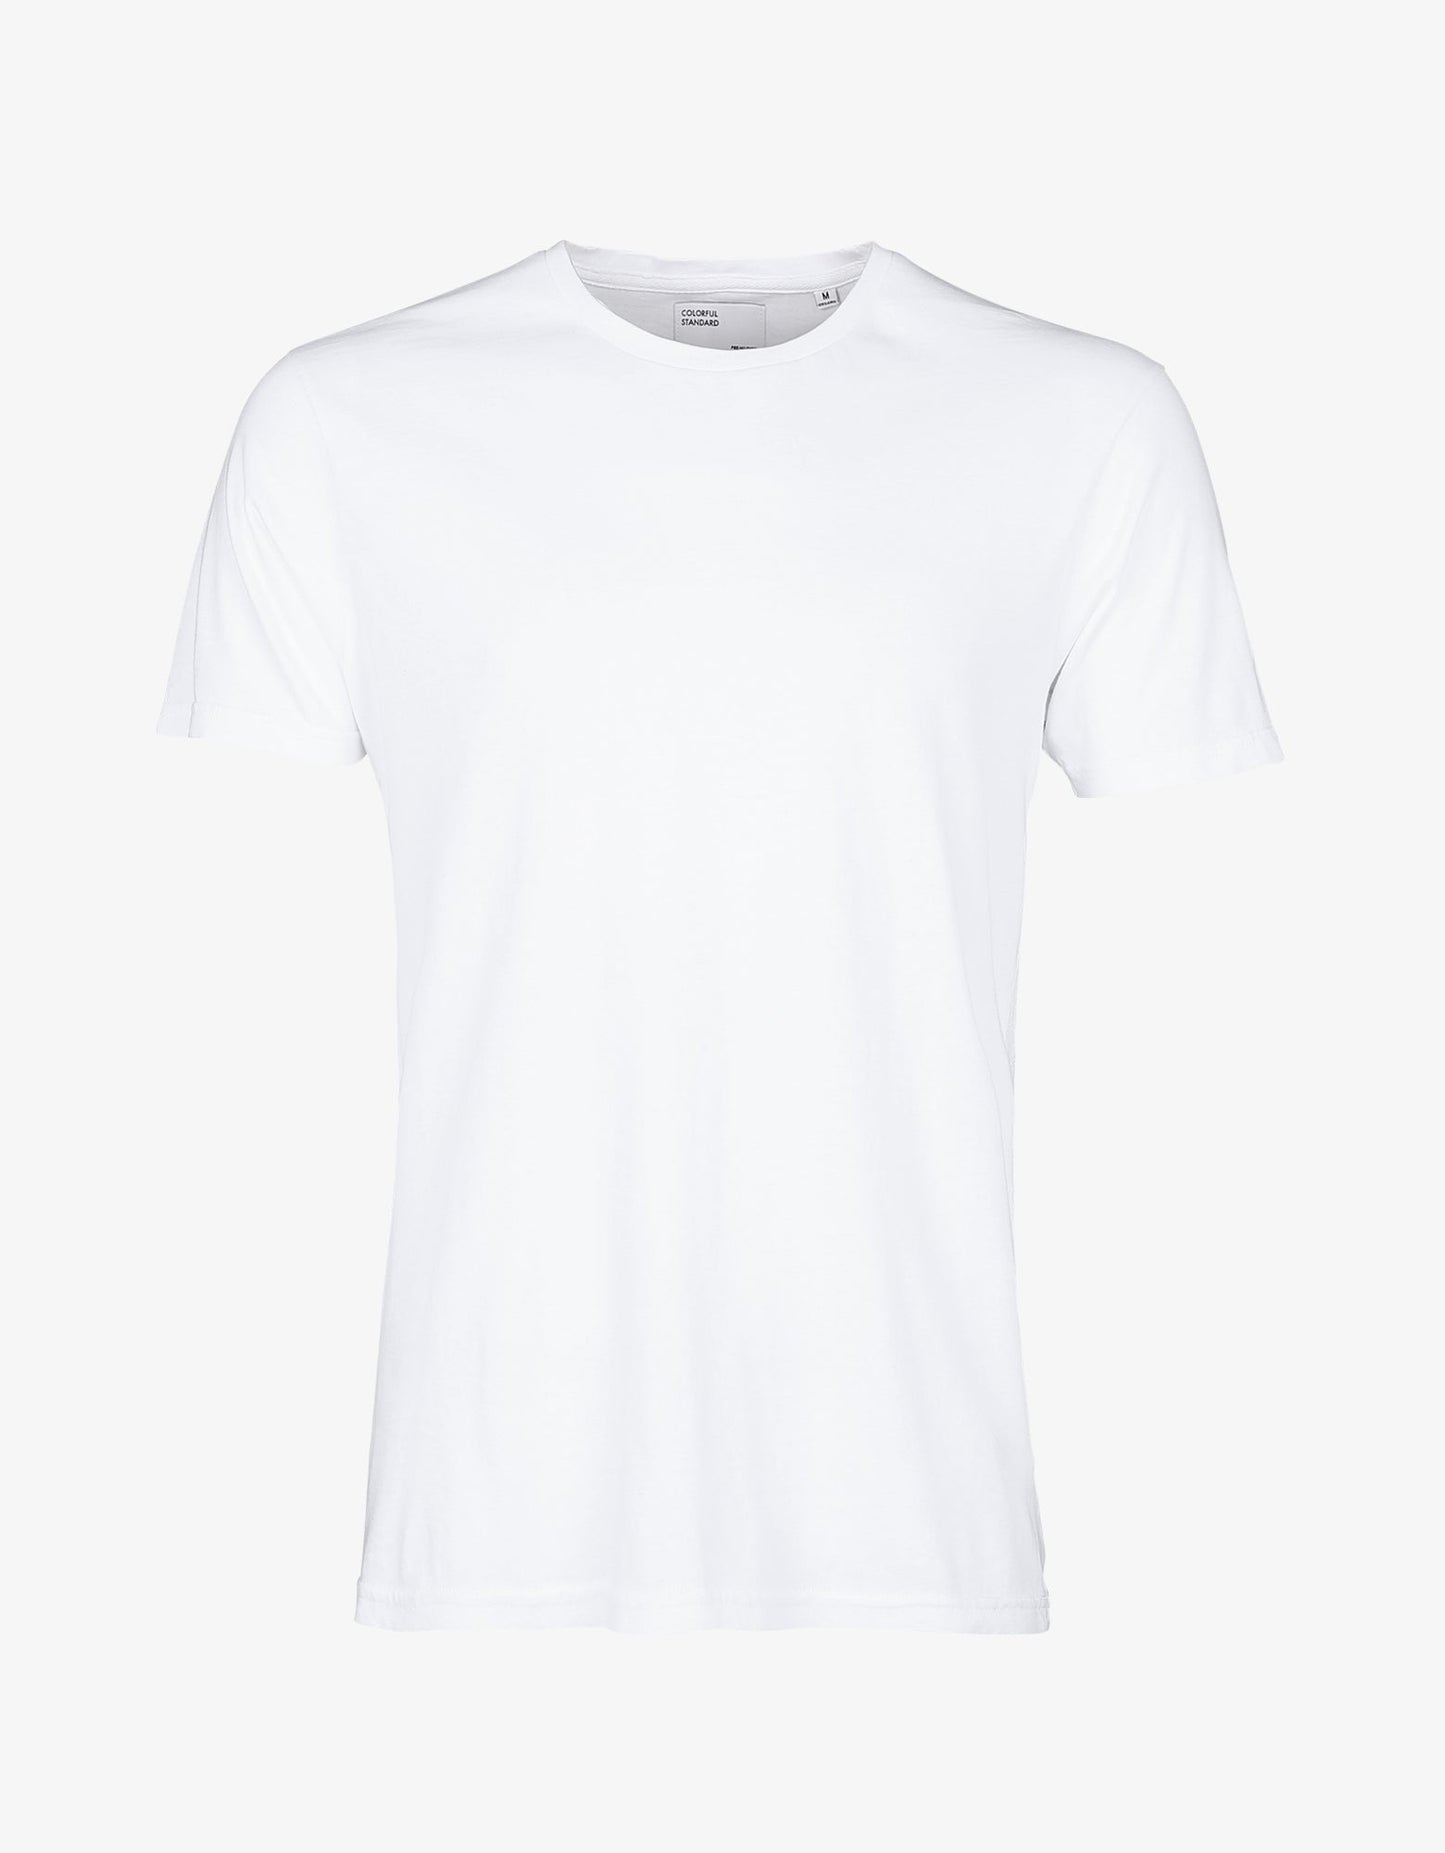 Colorful Standard Classic T-shirt - Oyster Grey